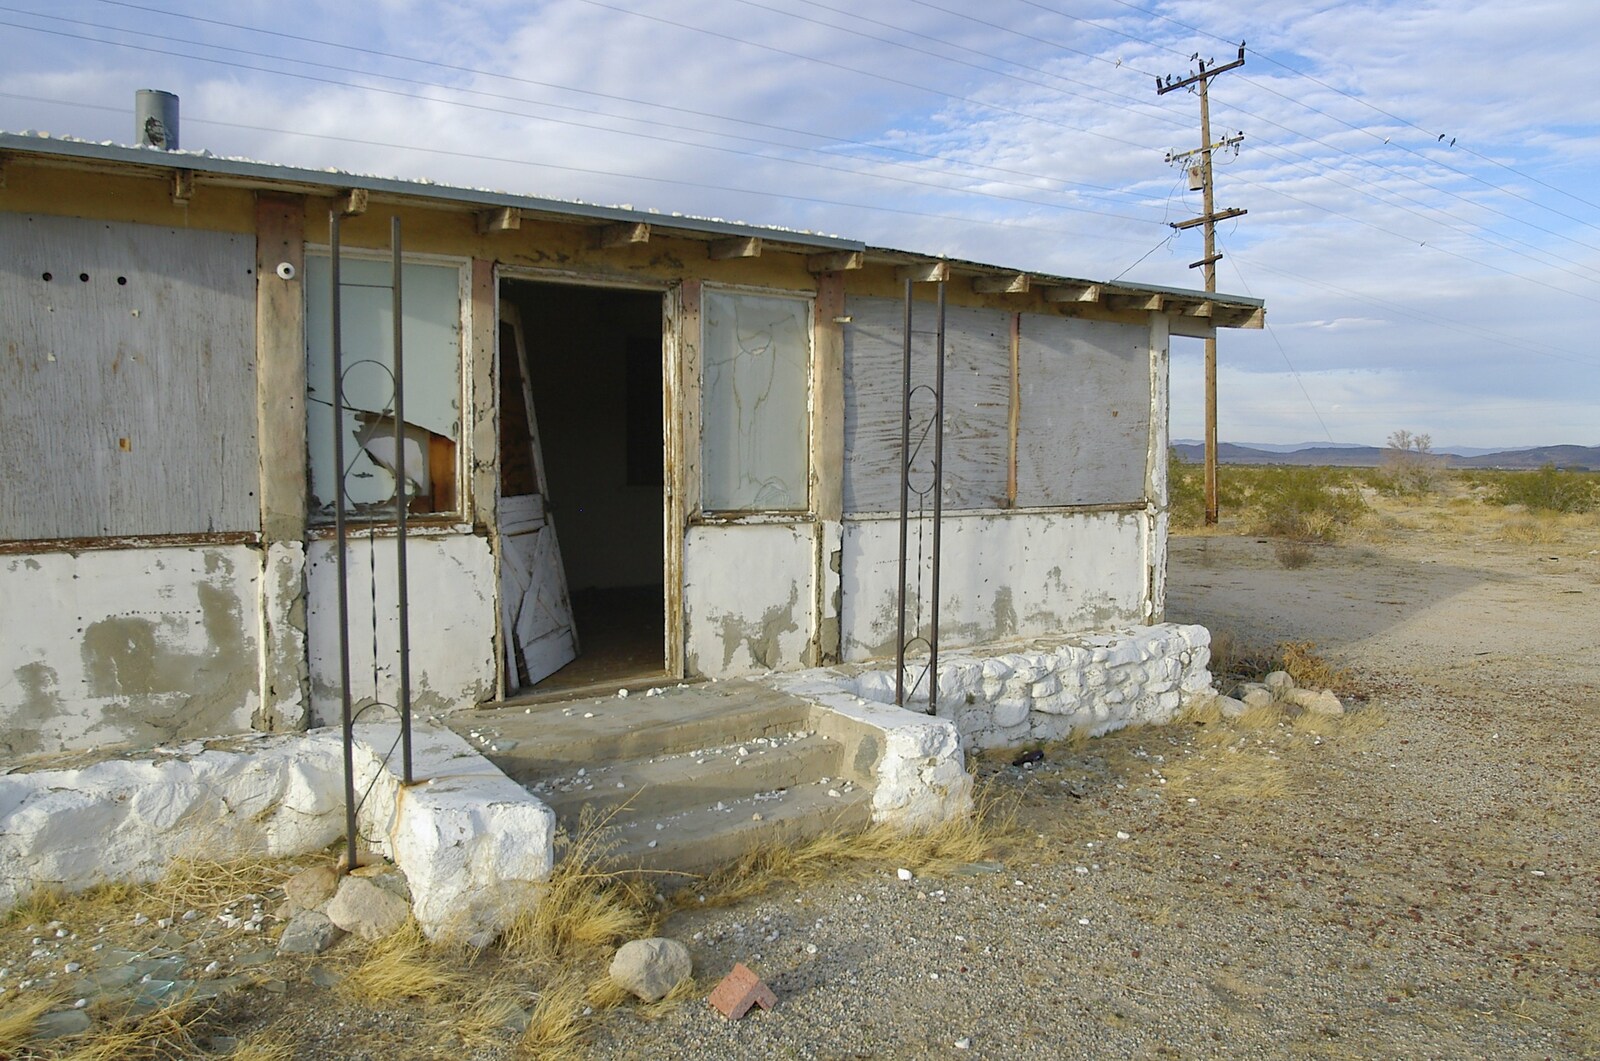 Back steps on a derelict house from Mojave Desert: San Diego to Joshua Tree and Twentynine Palms, California, US - 5th March 2006